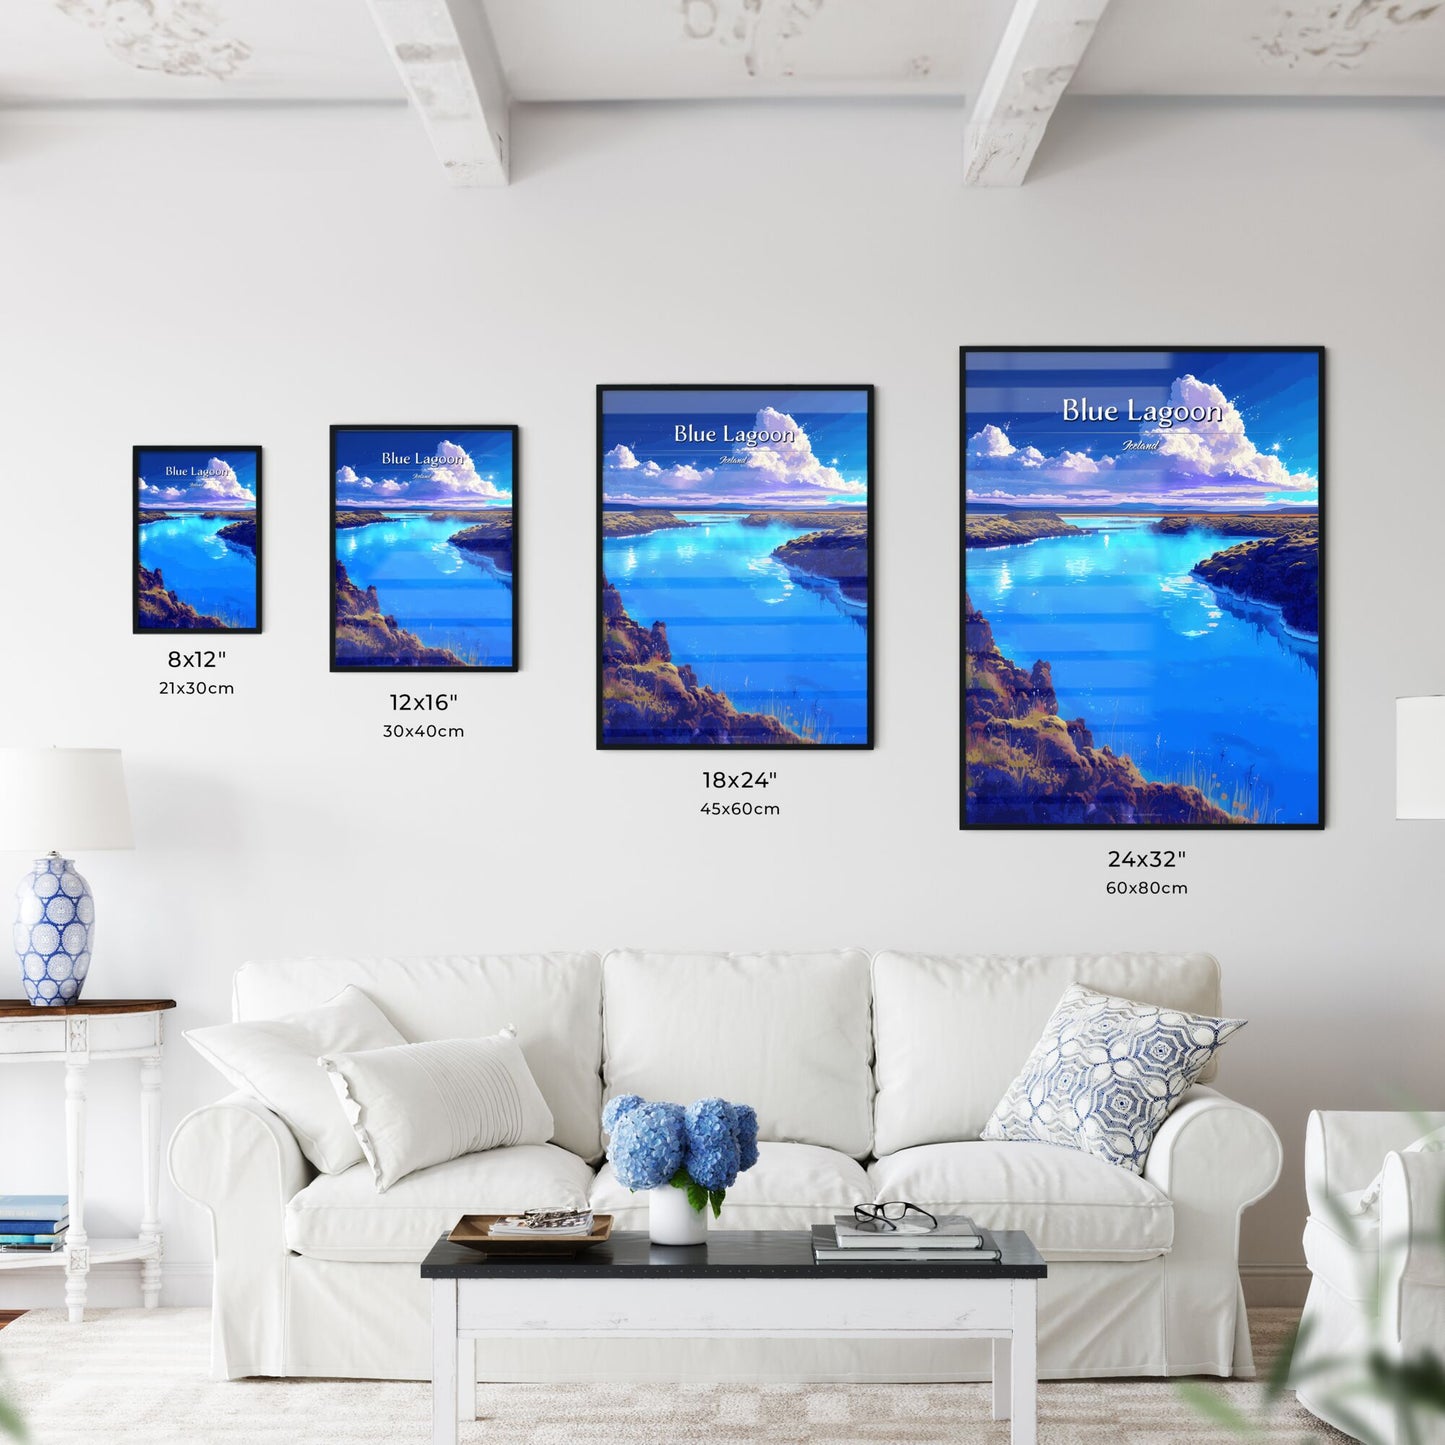 Blue Lagoon, Iceland - Art print of a blue water with rocks and clouds Default Title